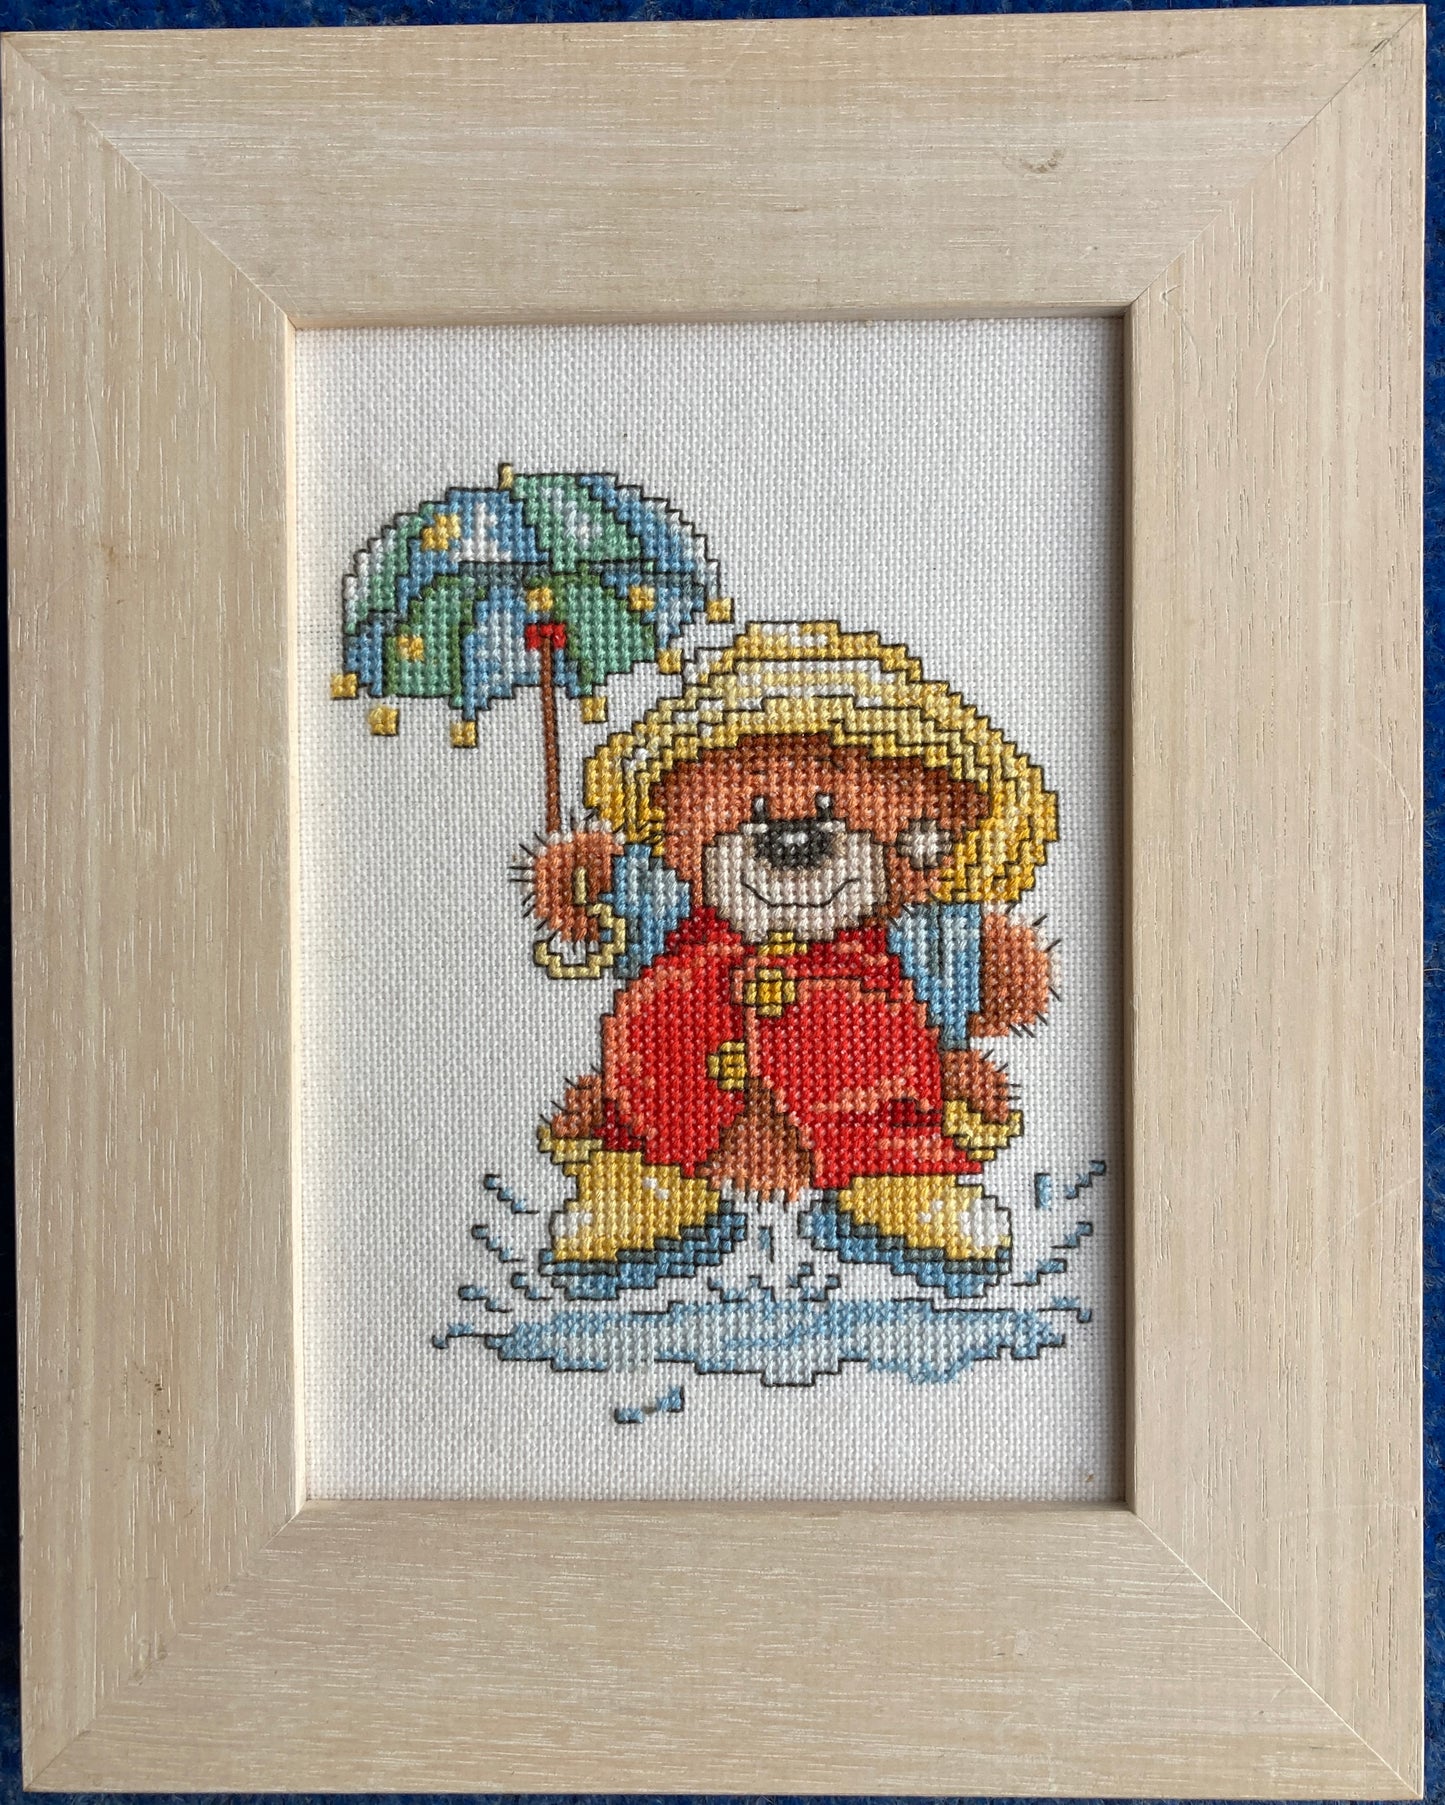 Framed Completed Cross-Stitch: Bollie the Bear series (LanArte) on Evenweave